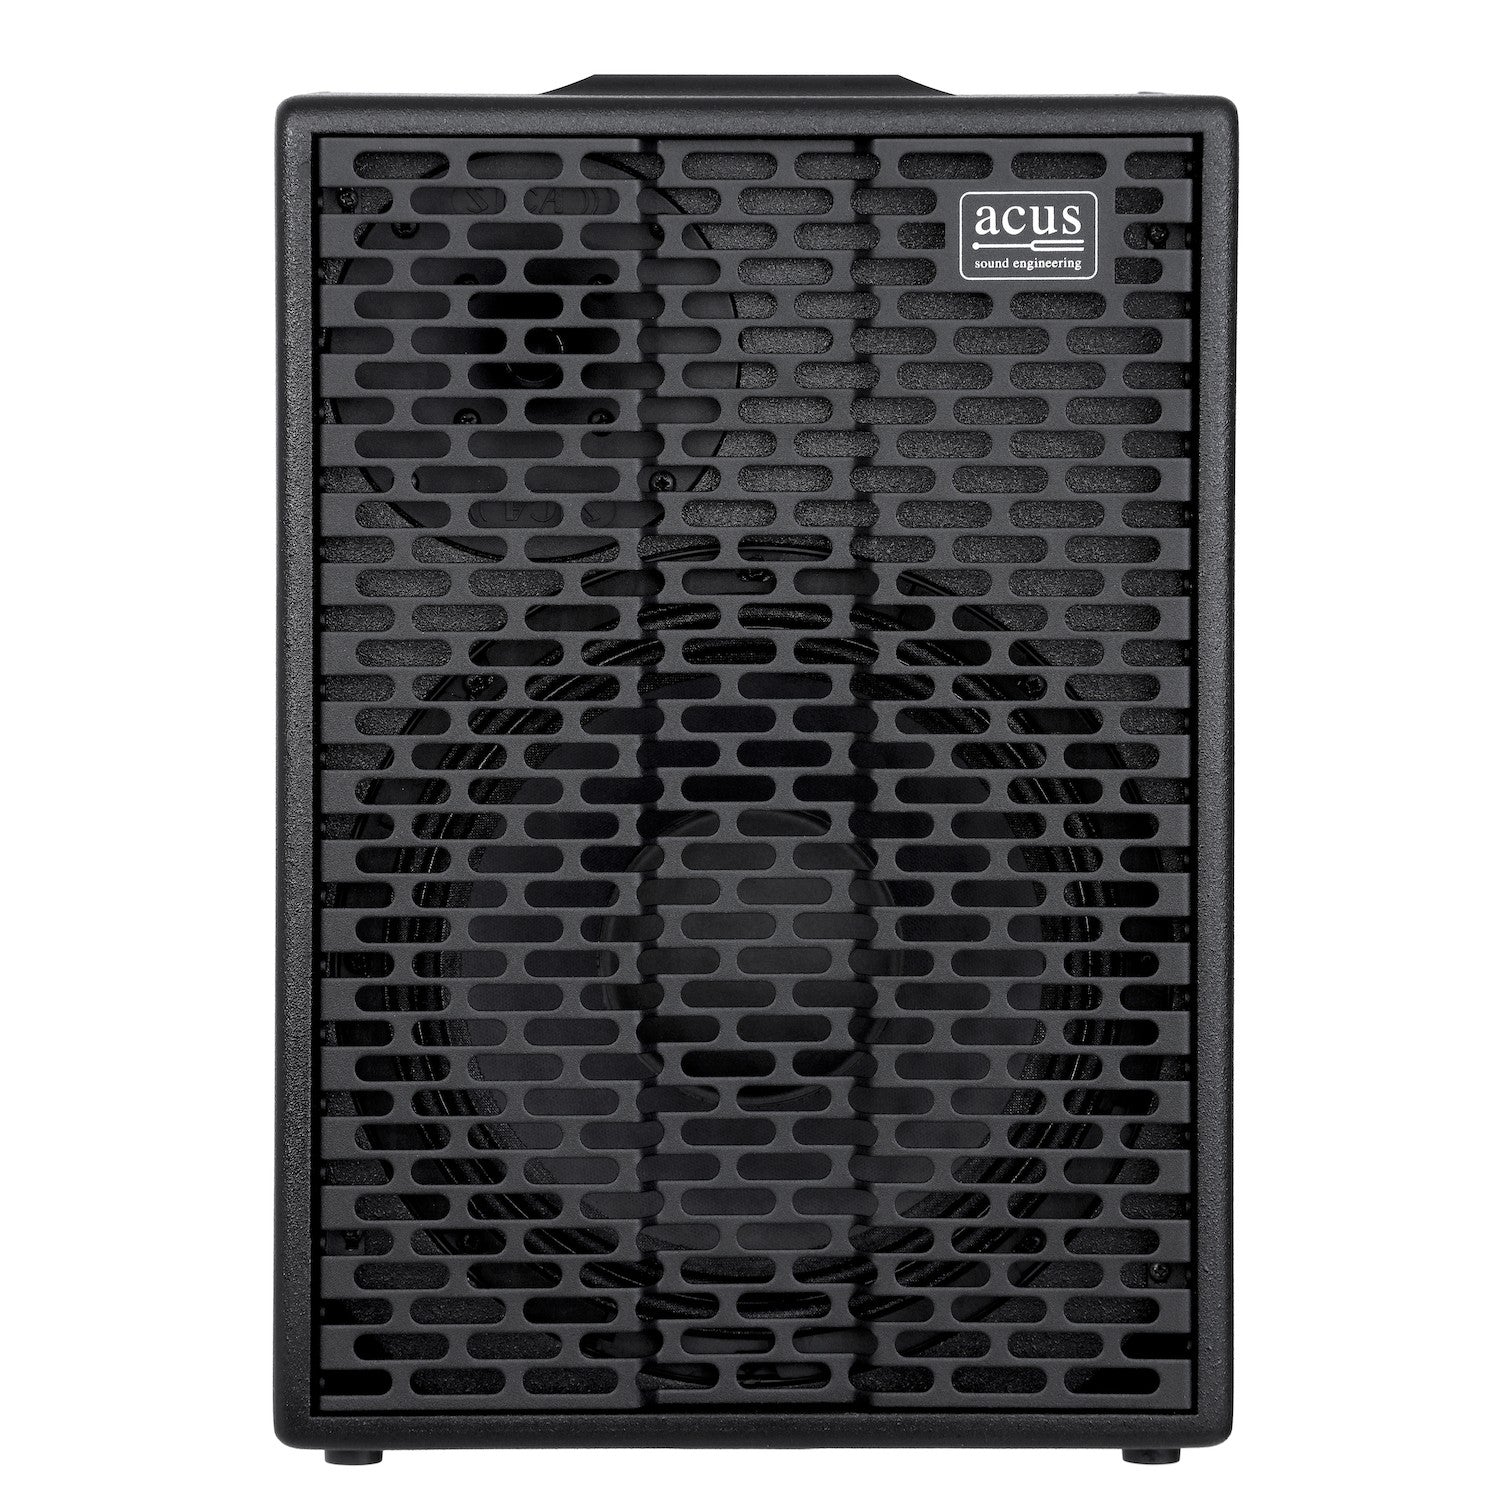 Amplifier Acus One Forstreet 10, Combo - Việt Music